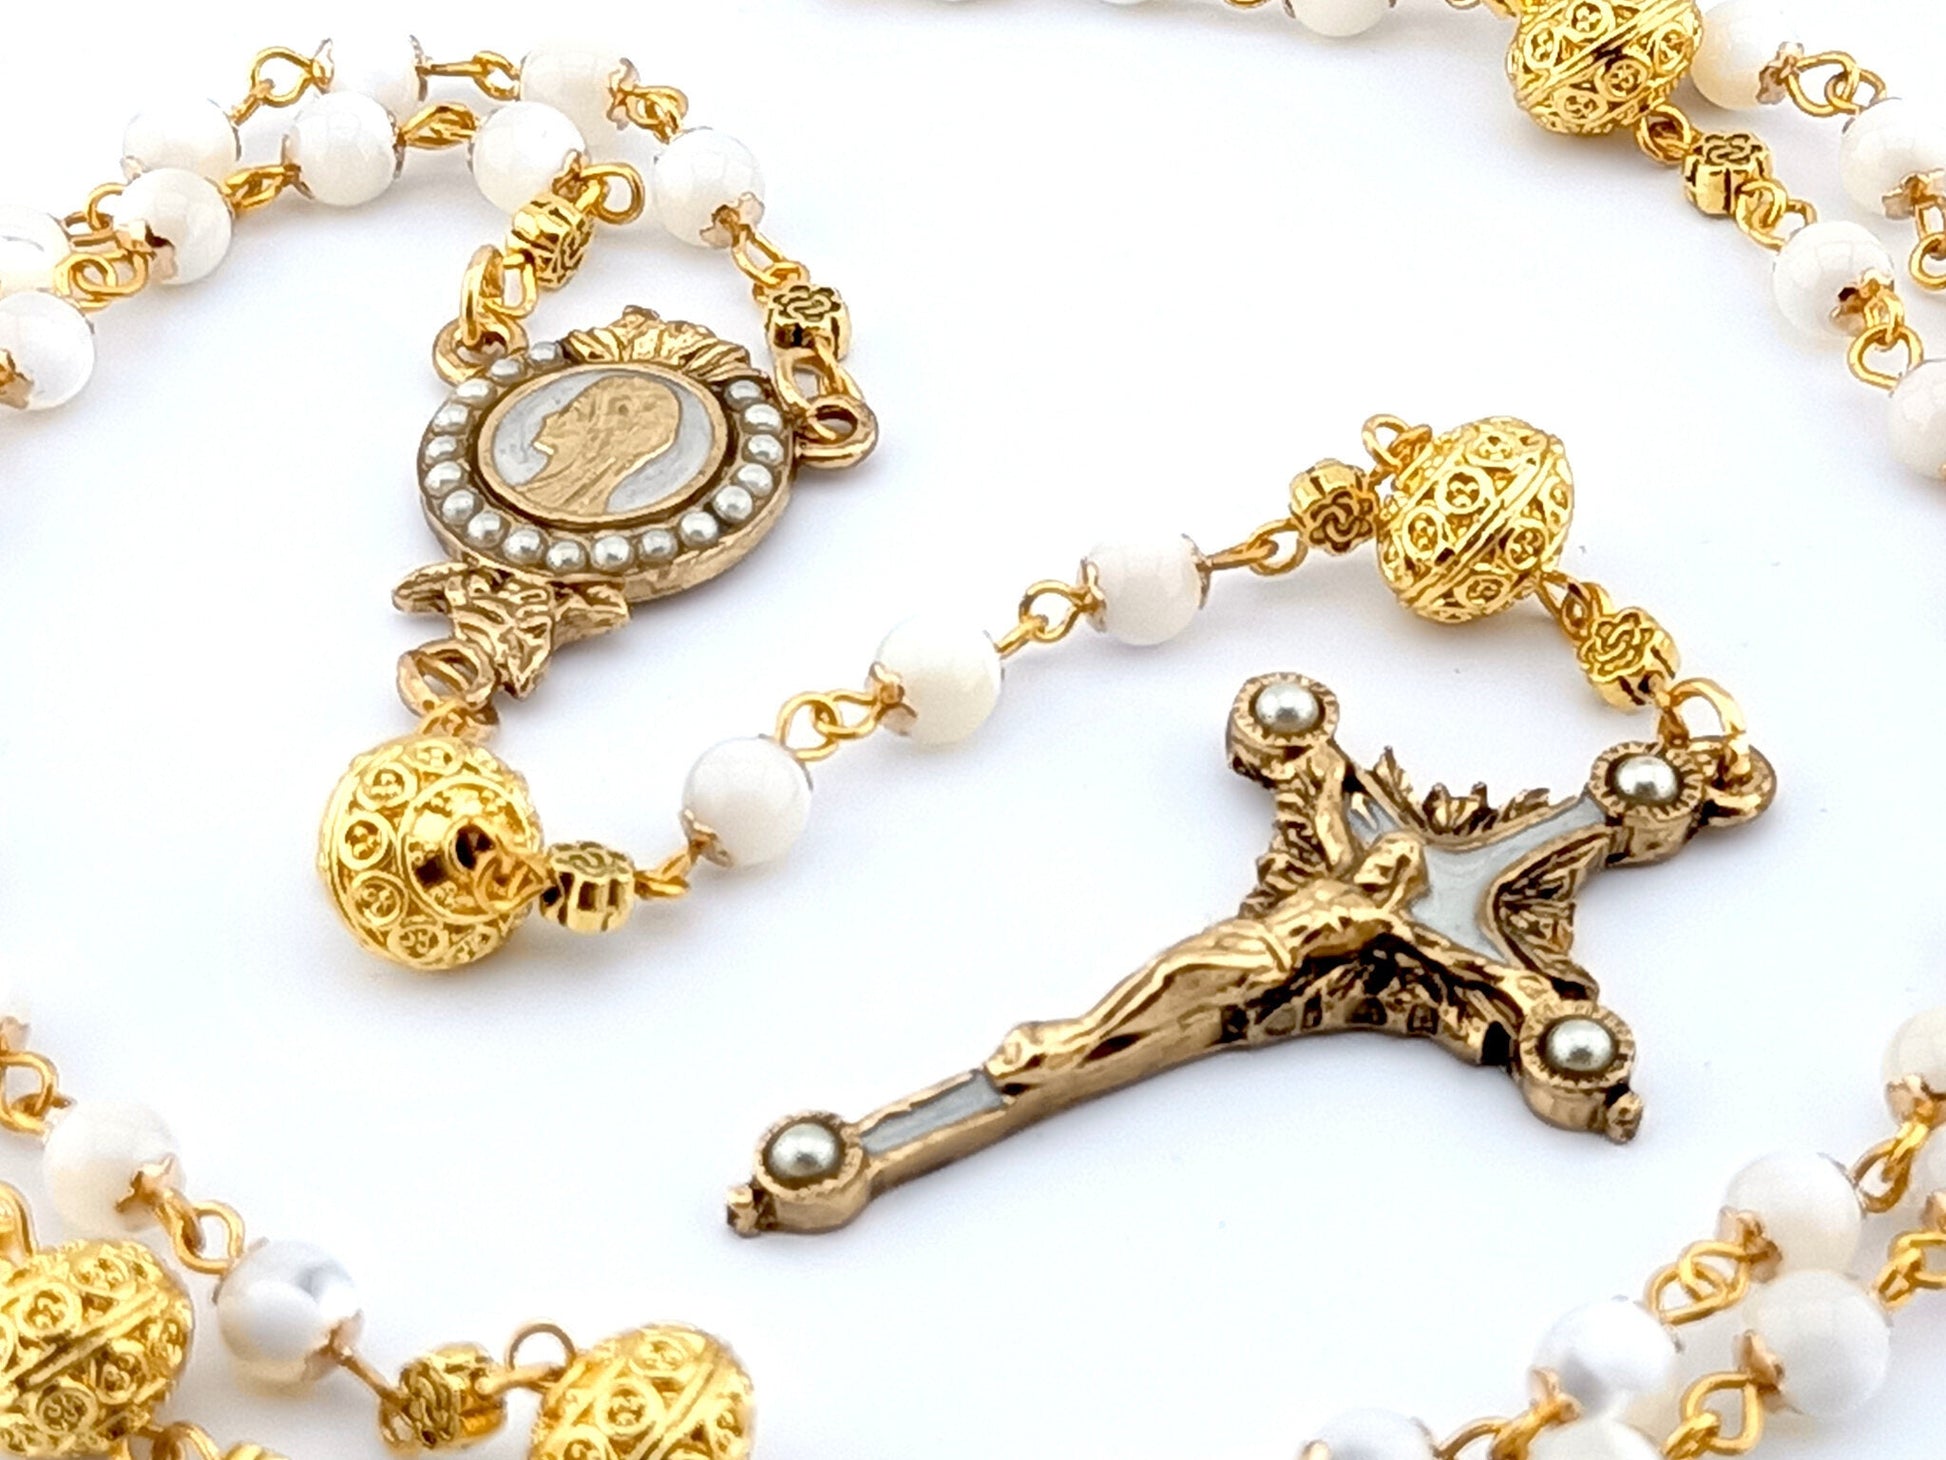 Our Lady of Grace unique rosary beads with mother of pearl beads, golden crucifix, pater beads and centre medal.